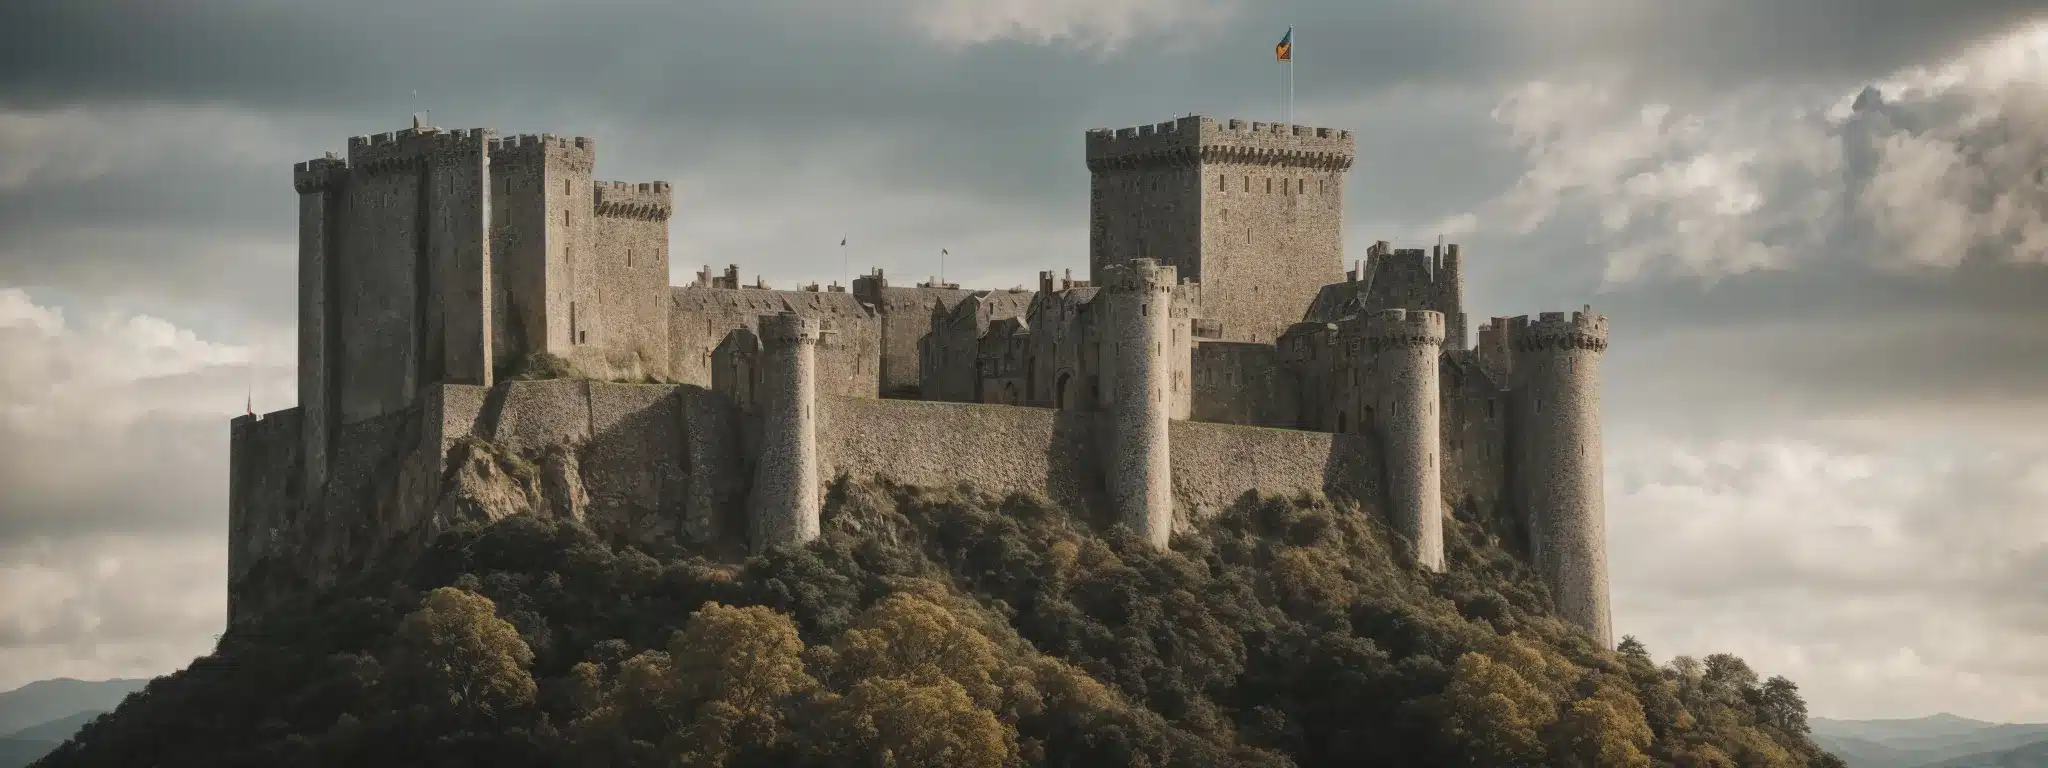 A Majestic Castle Towering Over A Landscape, Banners Fluttering In The Wind Atop Its Battlements.